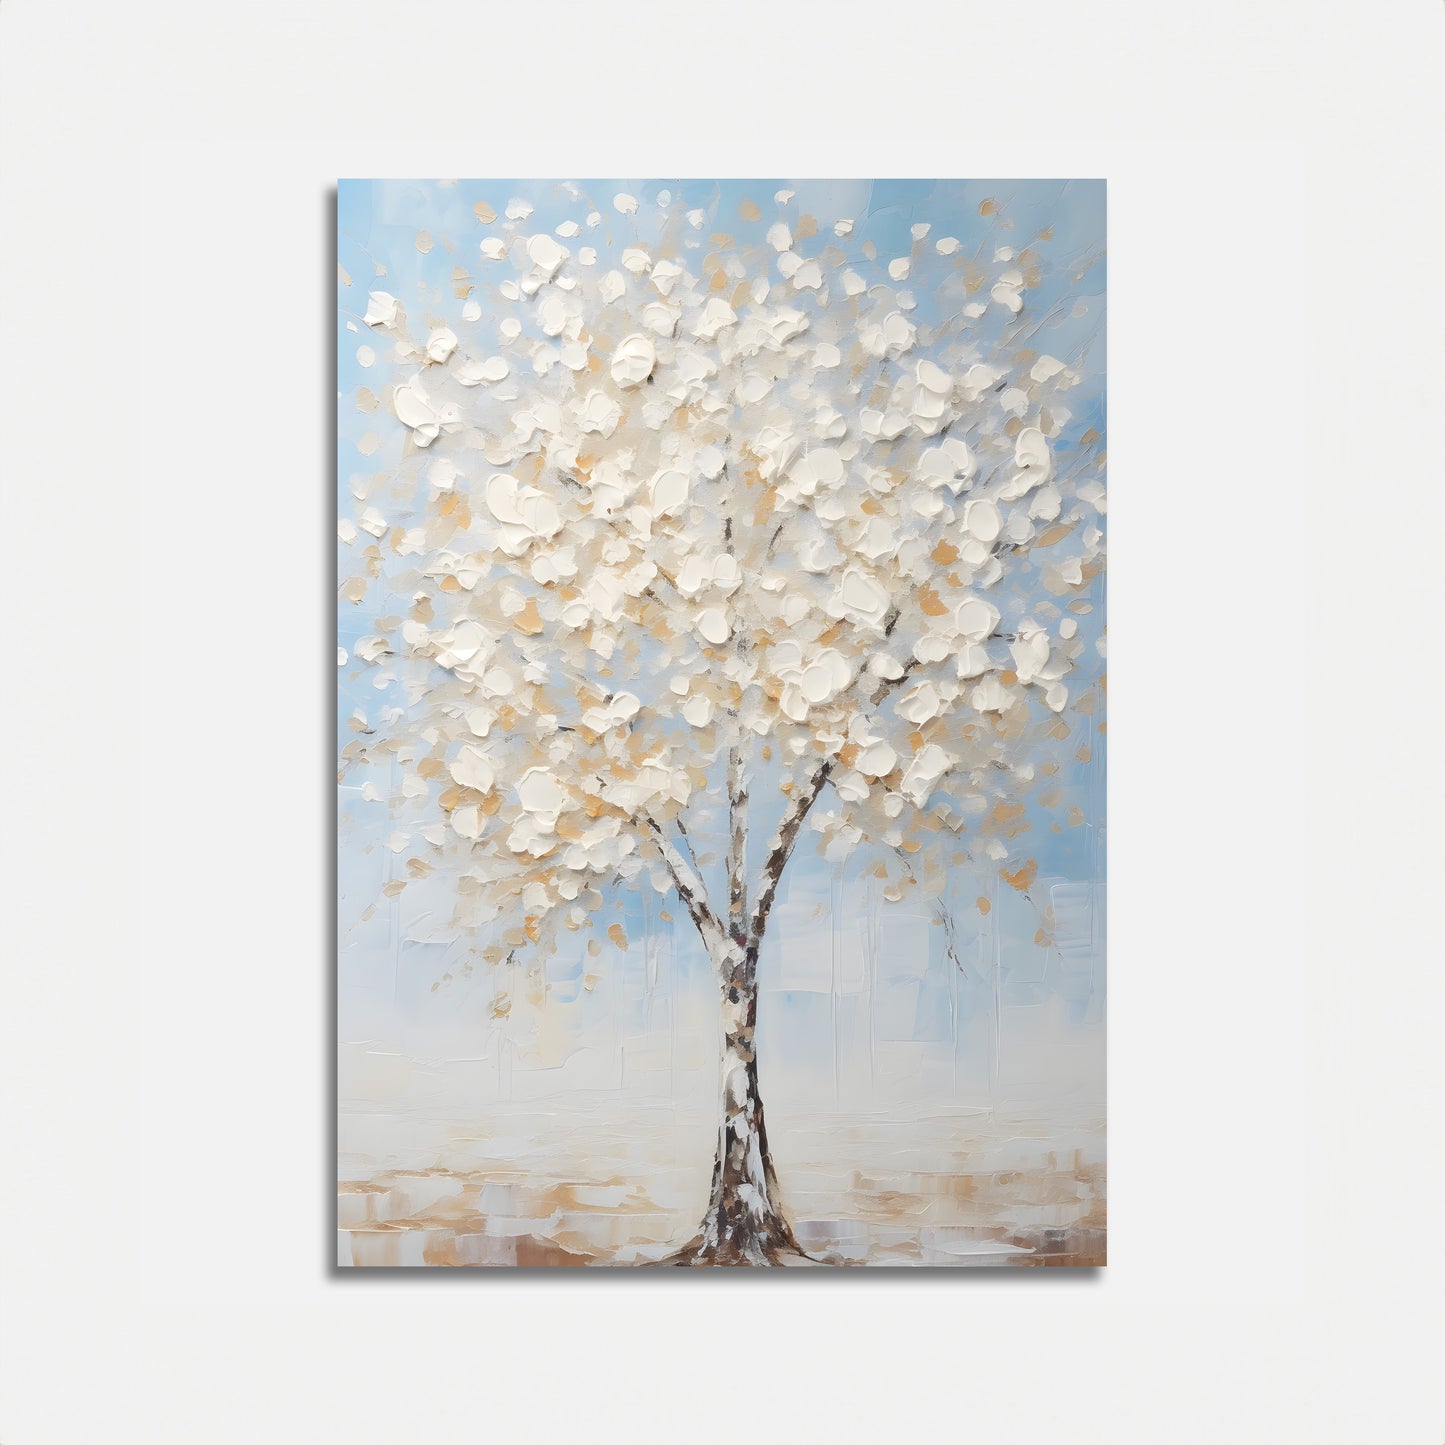 A painting of a tree with white and beige leaves against a blue sky.